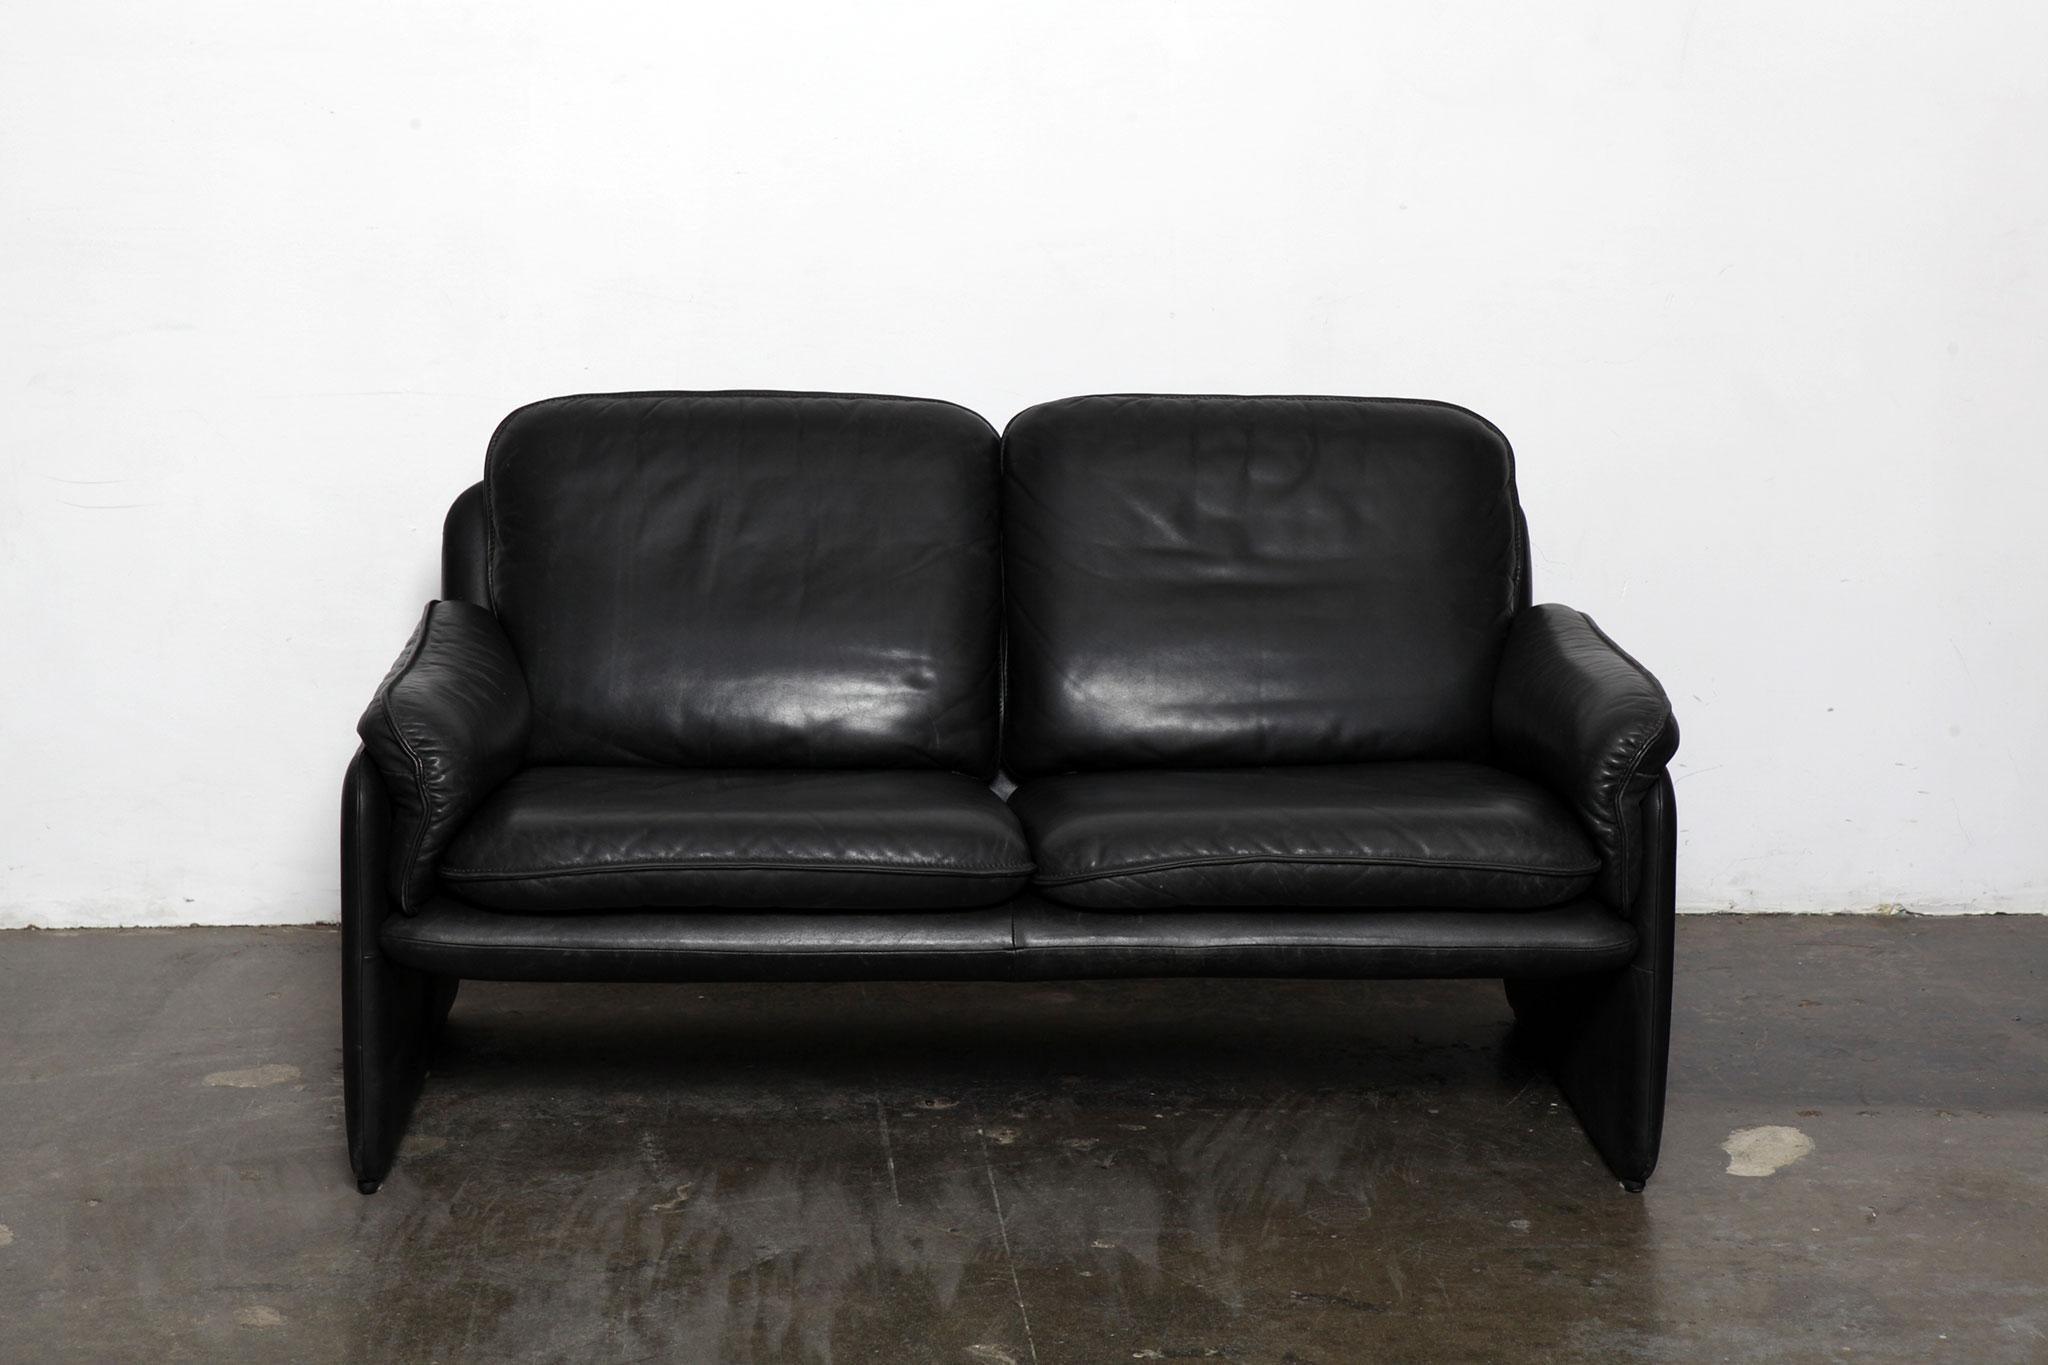 Original black leather recliner chair from De Sede, model 50, Switzerland. Leather shows wear/patina mainly in the lower parts of the sofa.